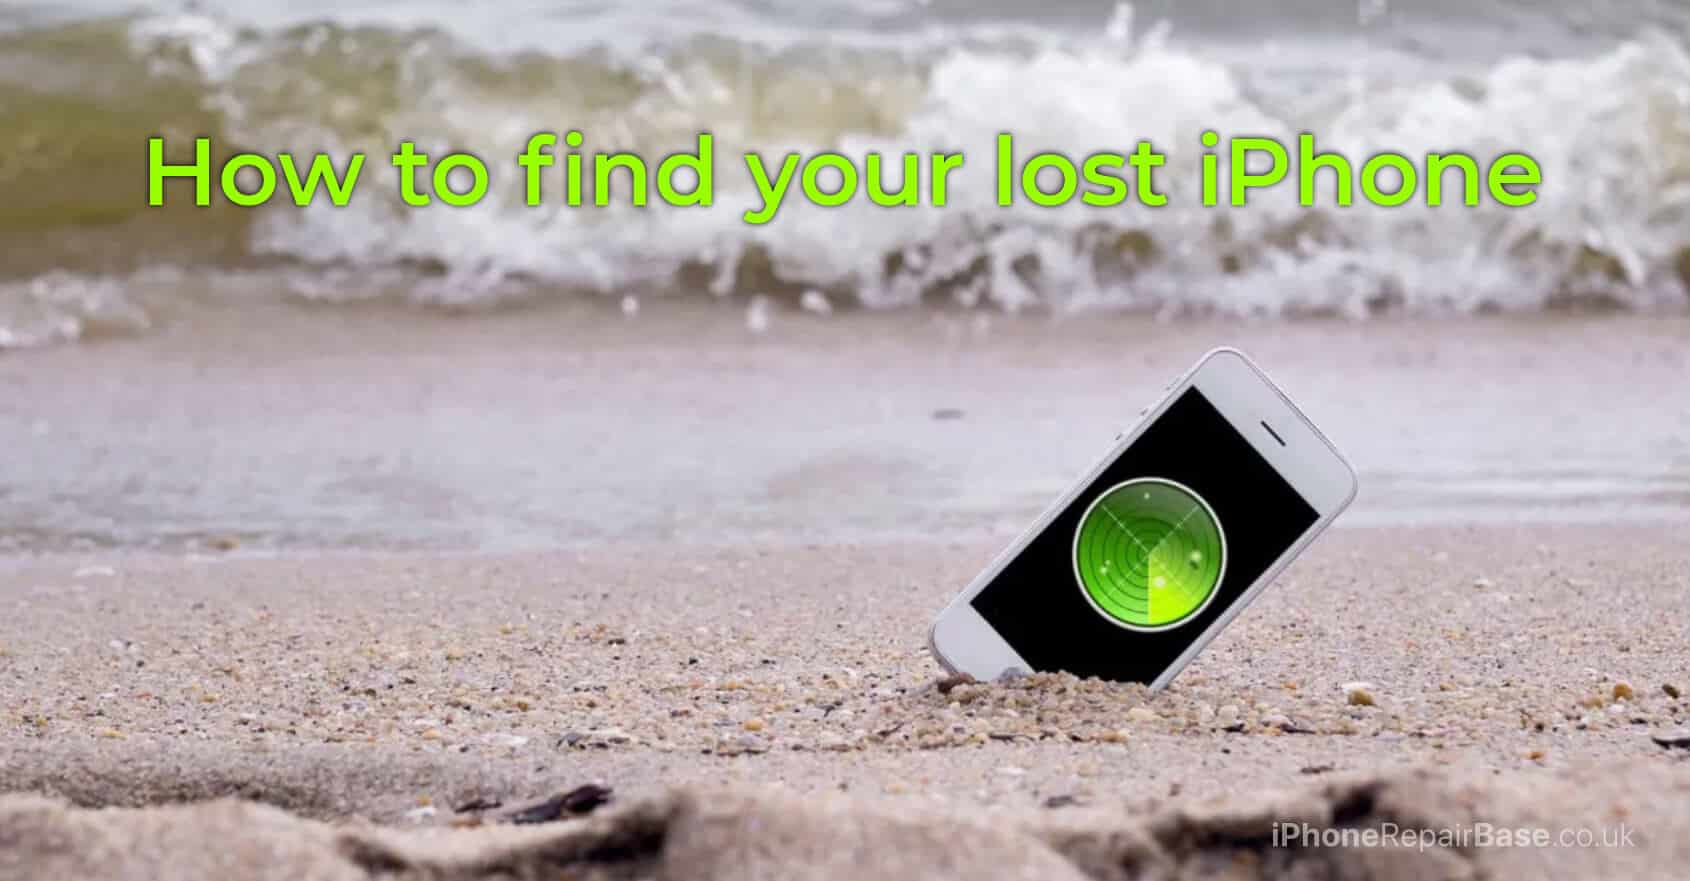 How to find your lost iPhone